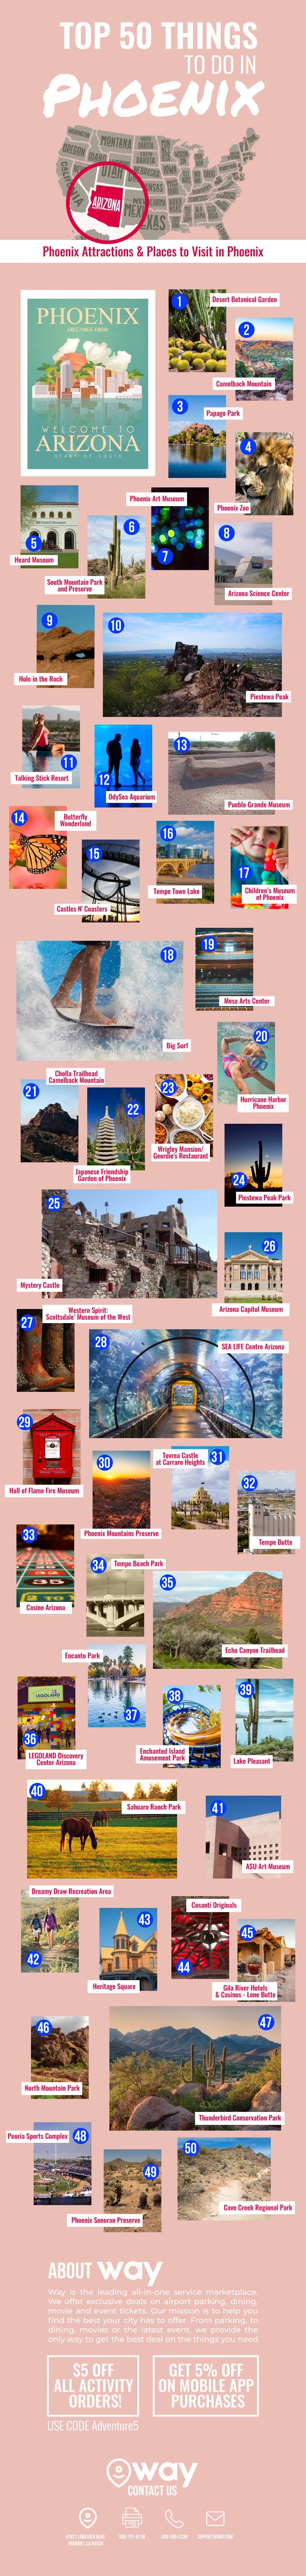 Top 50 Things to Do in Phoenix #infographic